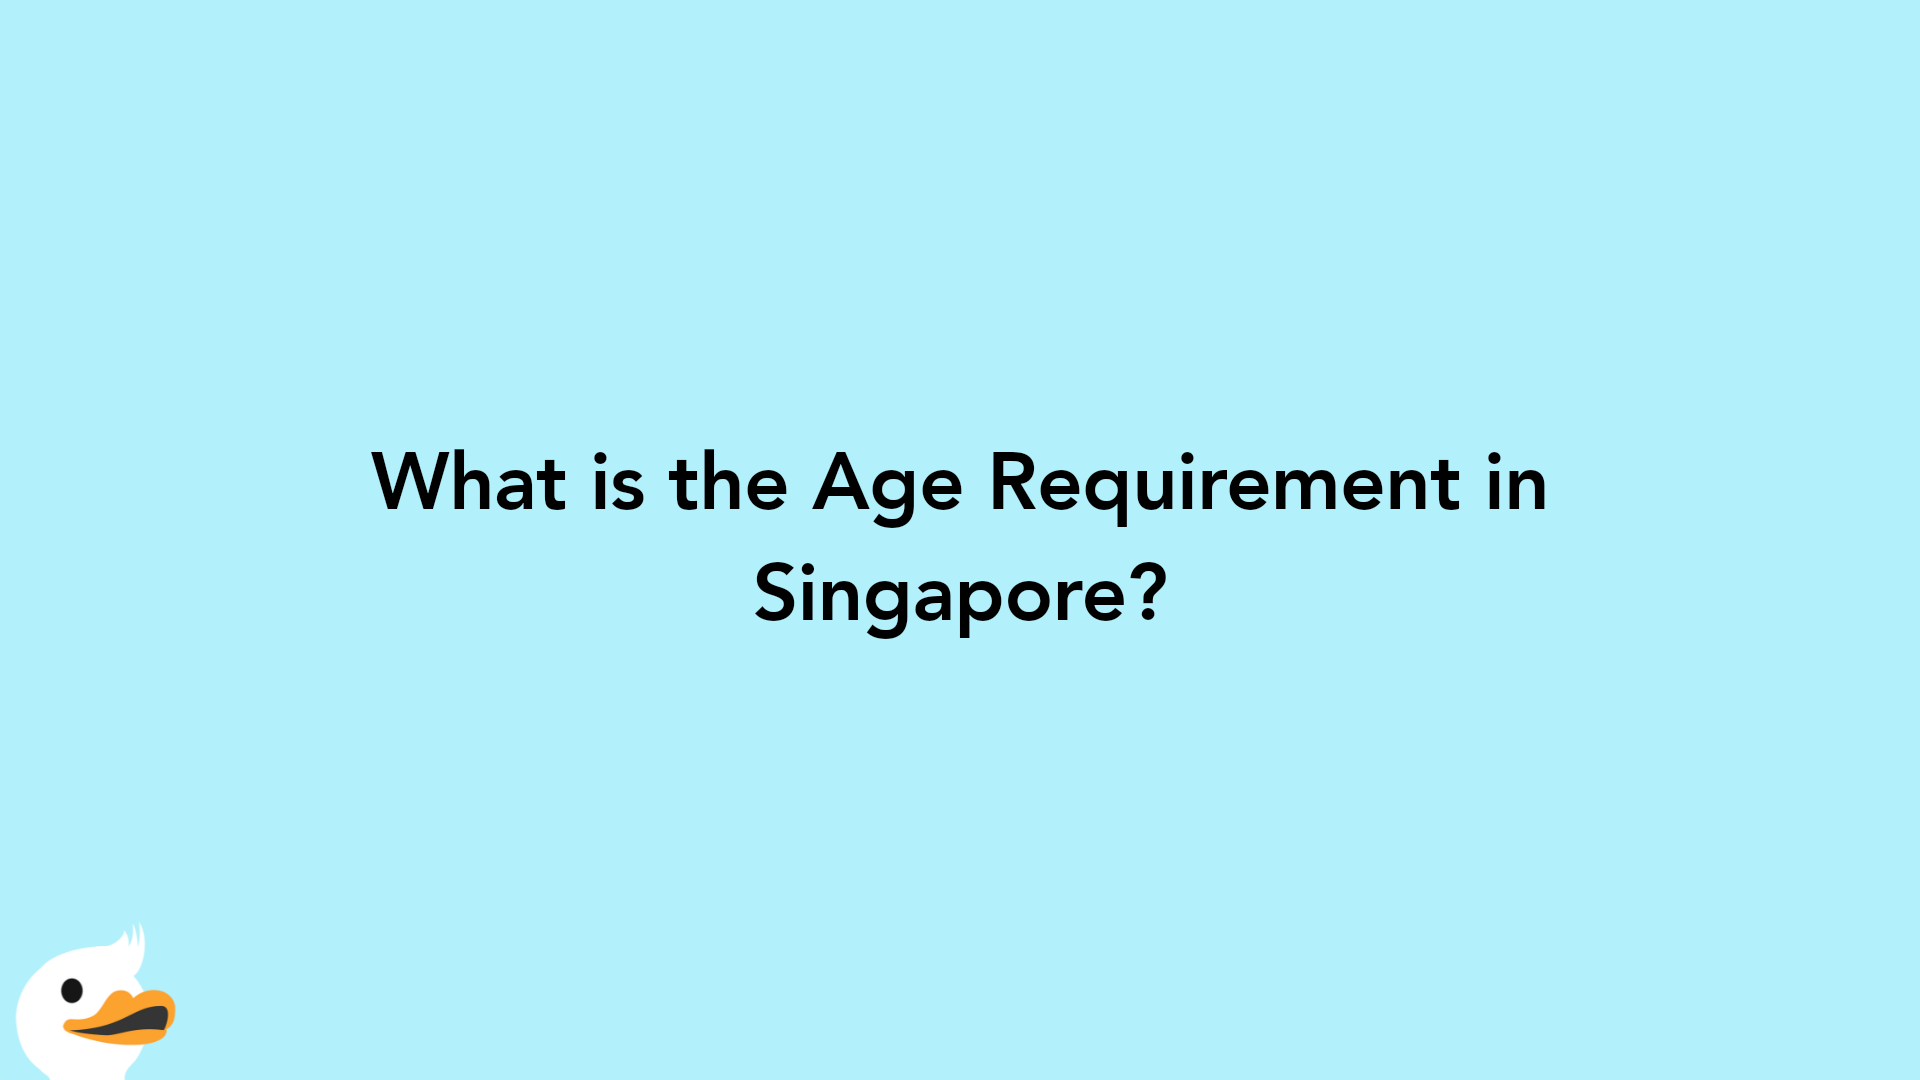 What is the Age Requirement in Singapore?